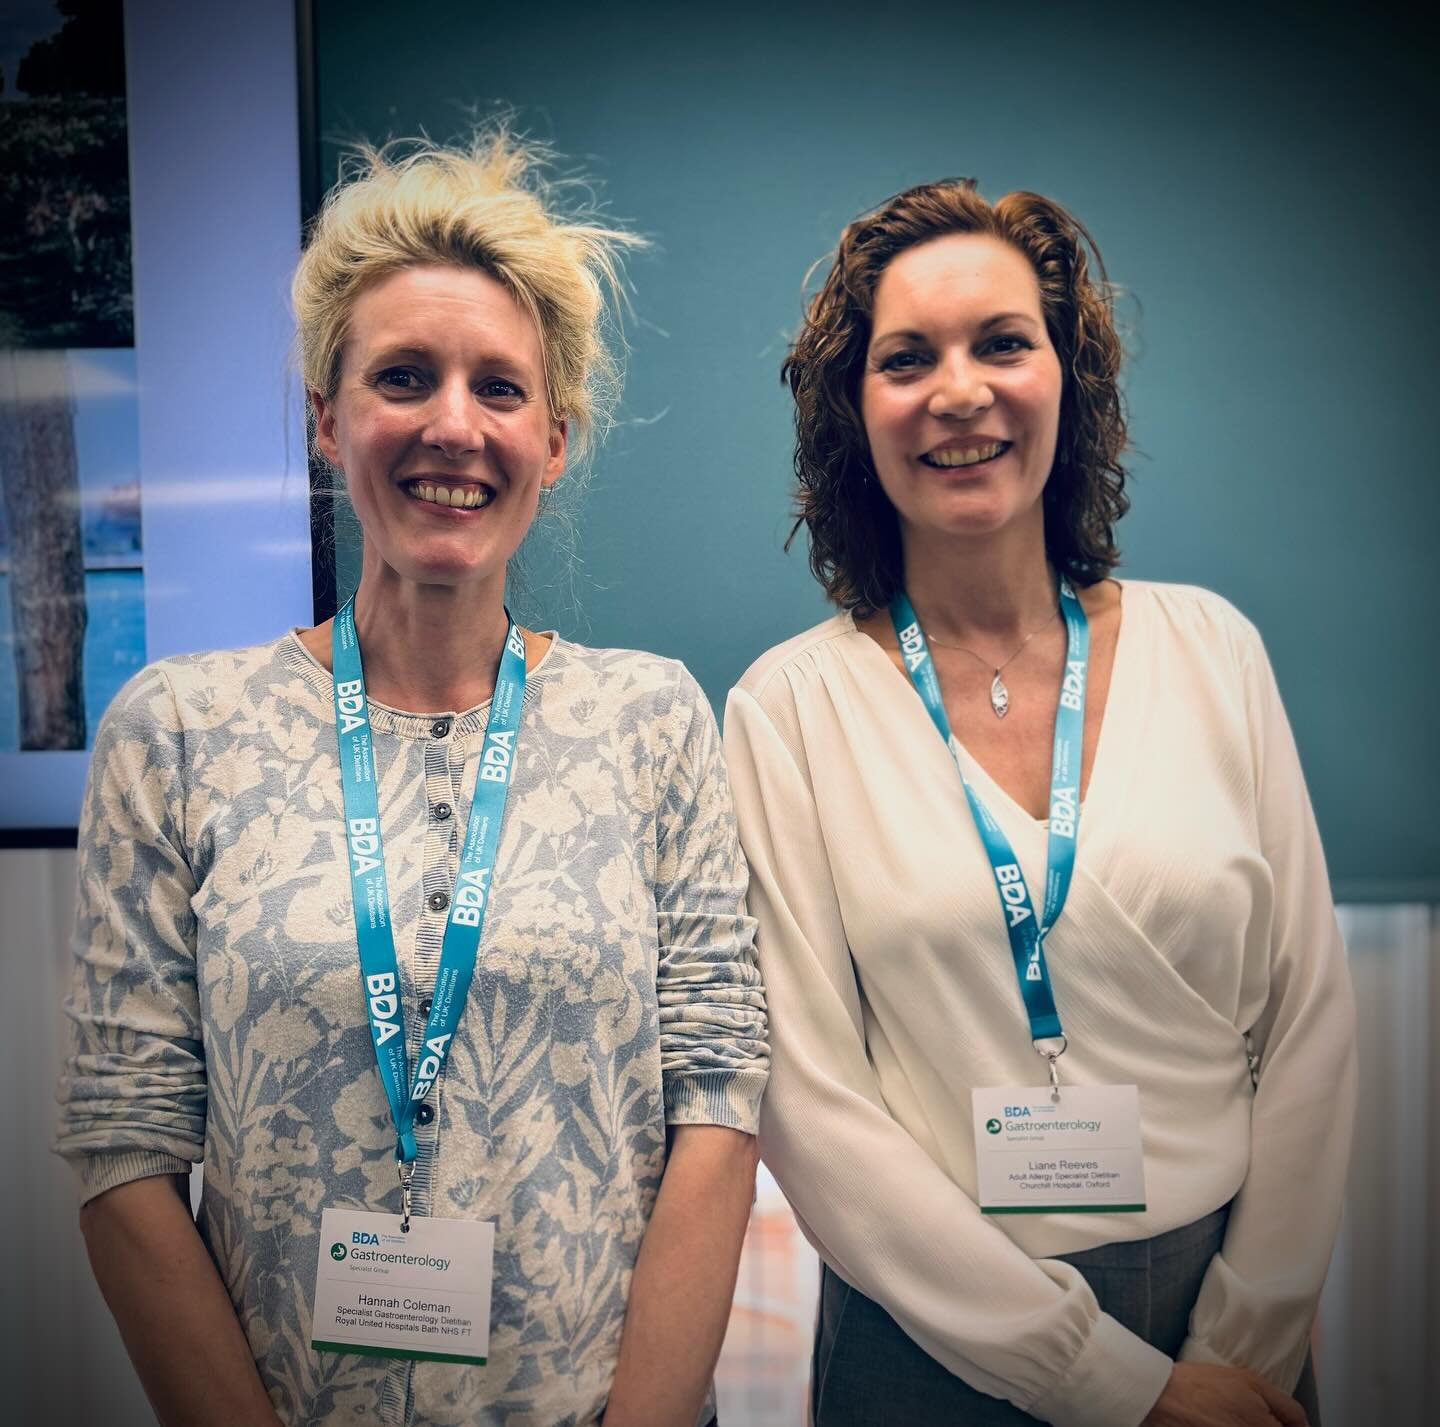 First UK gastroenterology dietitian&rsquo;s qualified in gut-directed hypnotherapy - Left to Right: Hannah Coleman &amp; Liane Reeves. A much needed service for many patients suffering with gut symptoms. See www.thecontentedgut.com for more info

#hy